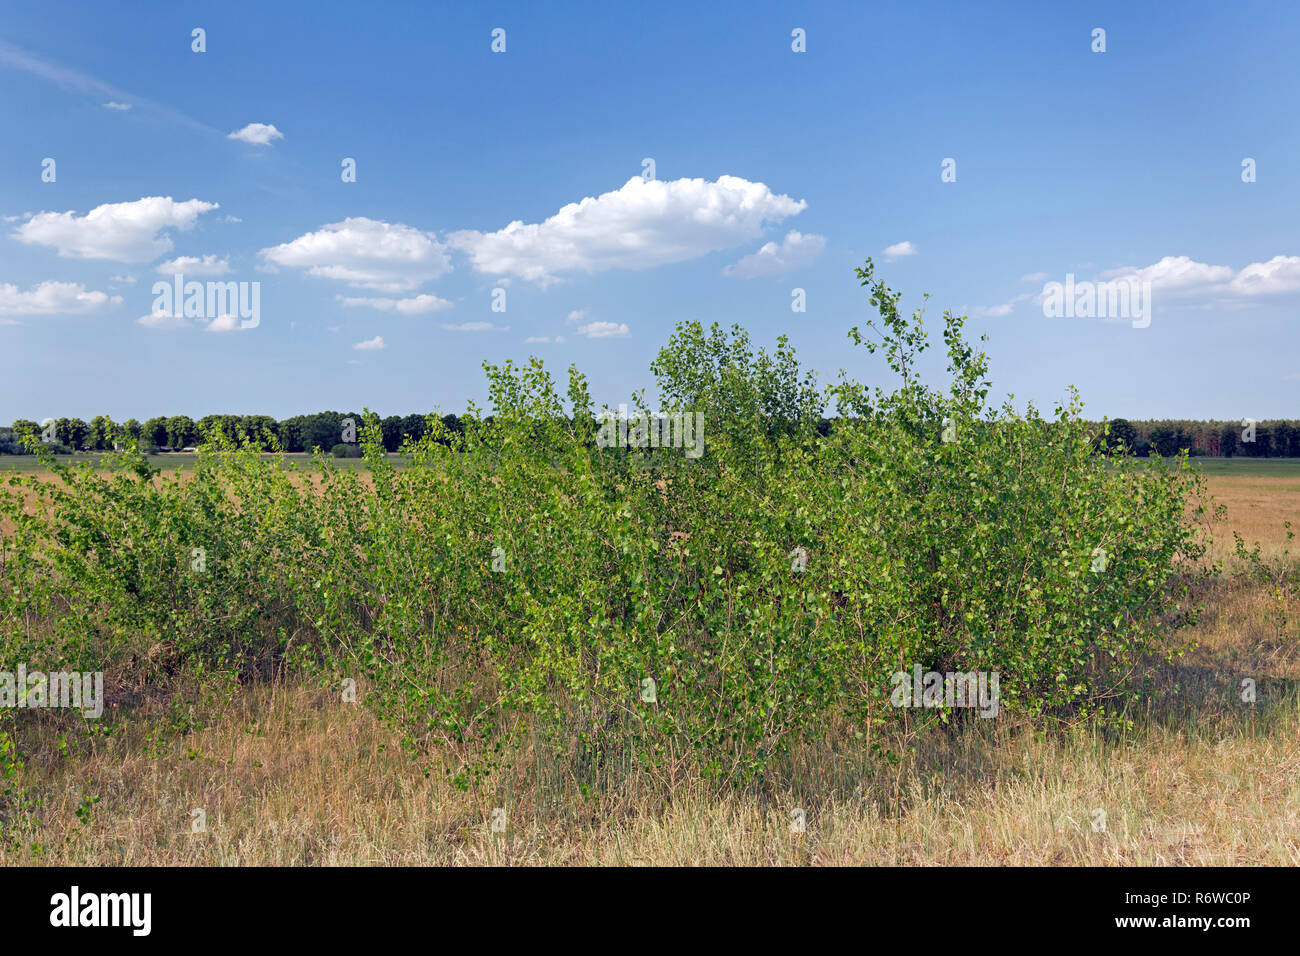 Black poplar (Populus nigra) young tree in summer, species of cottonwood poplar native to Europe, southwest and central Asia and northwest Africa Stock Photo